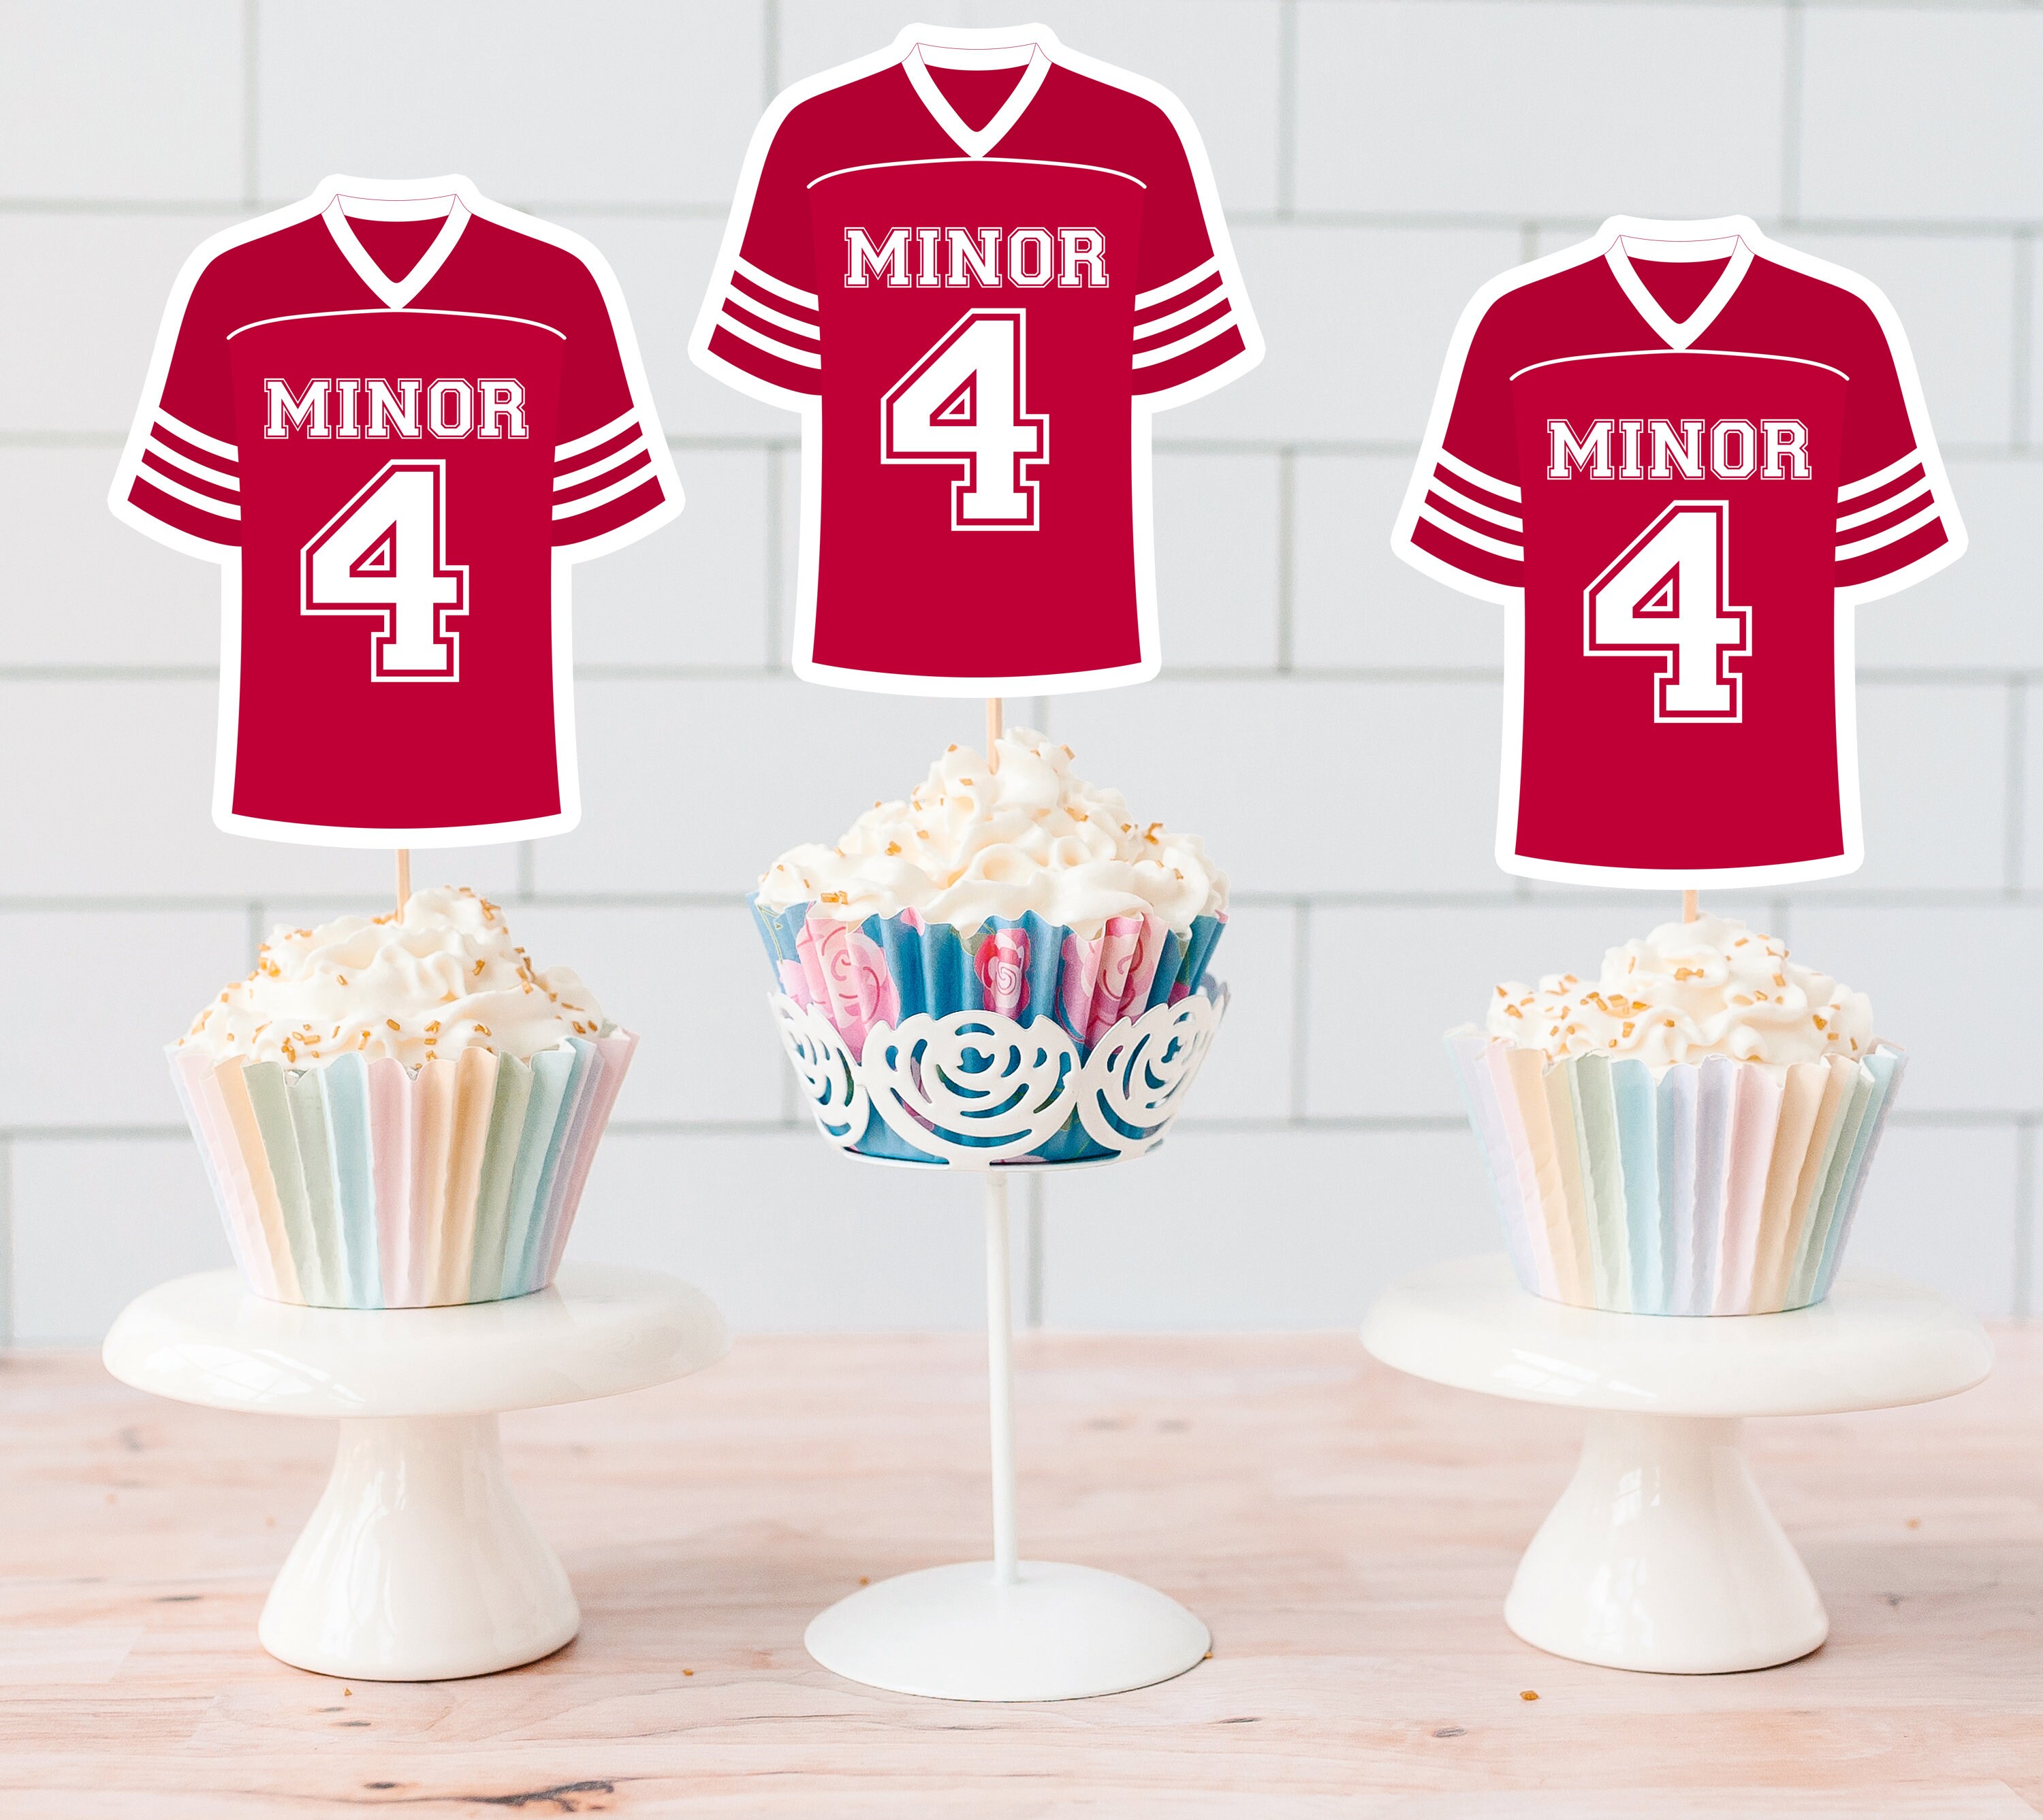 Sf 49ers cake topper #happybirthday#sanfrancisco49ers#cakedecorating#c